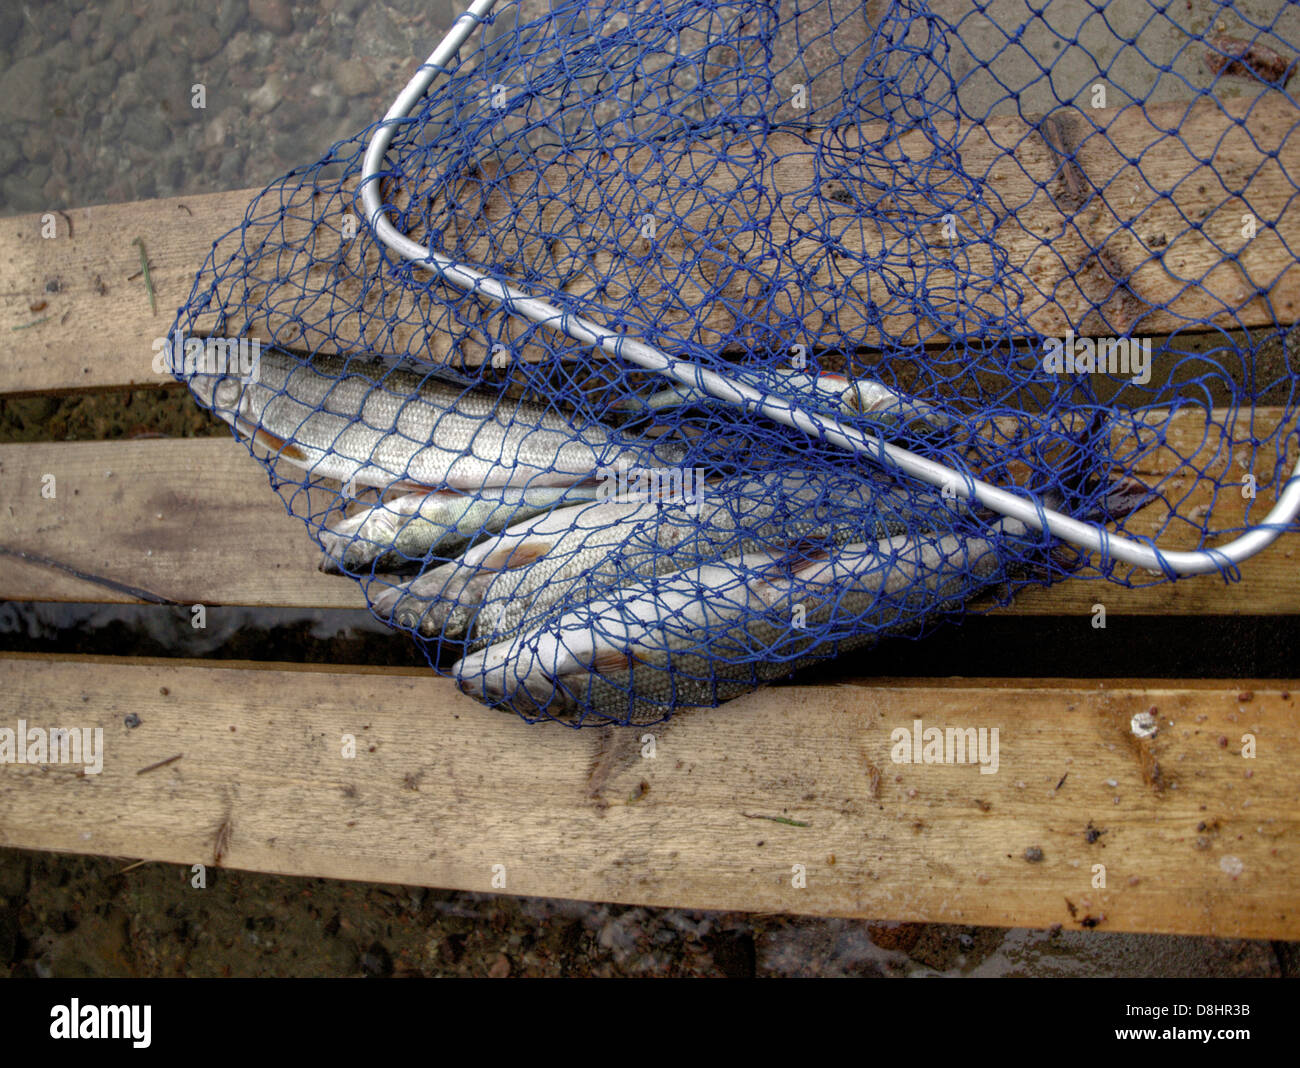 Hand net full of fish 3 Graylings and 2 perch. Stock Photo